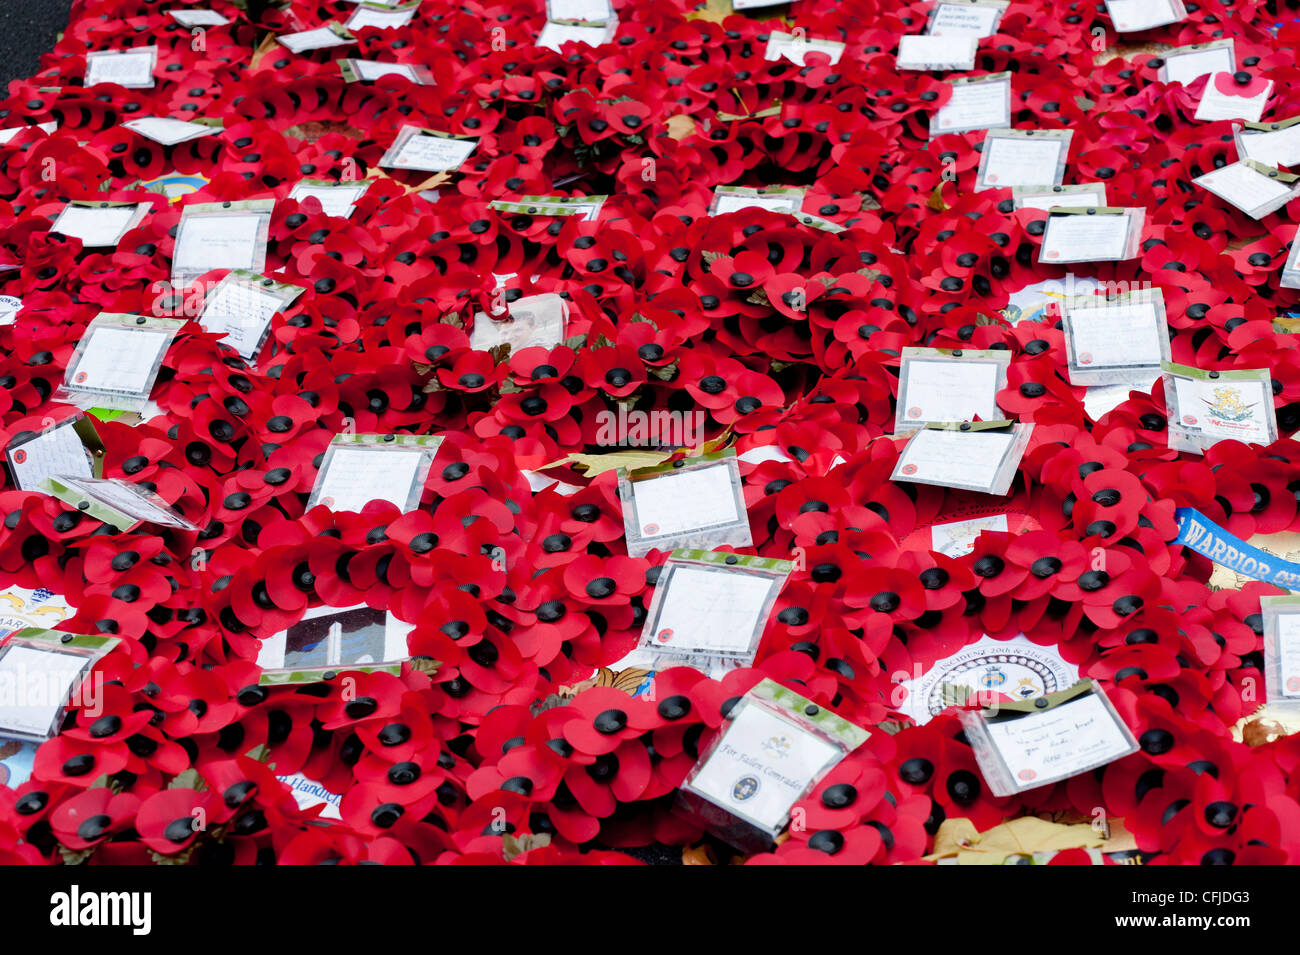 Remembrance day poppies at London's Cenotaph, Whitehall. Stock Photo